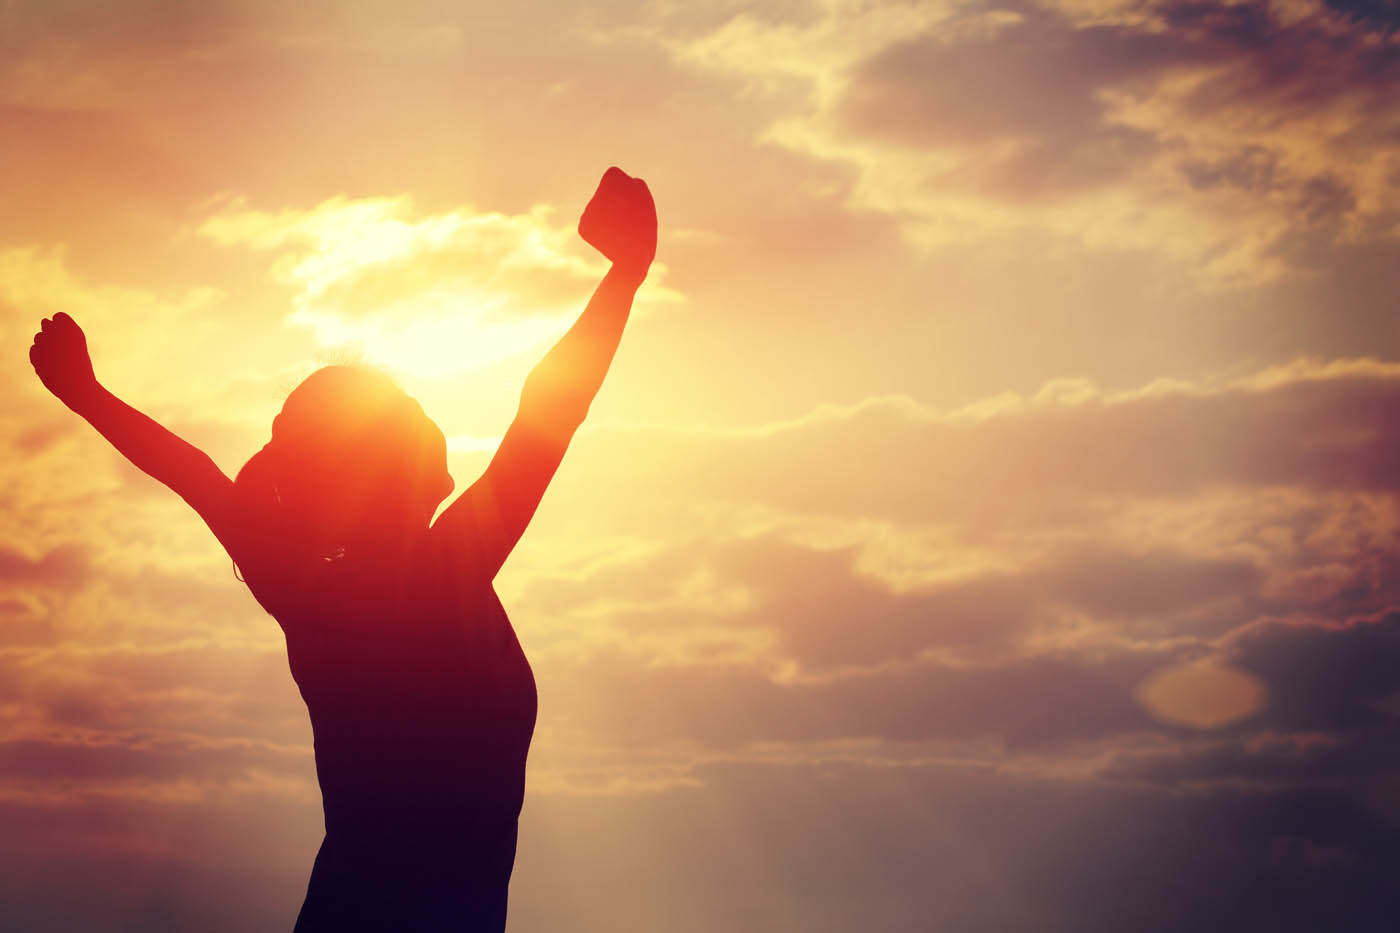 A woman standing in the light with her arms up in the air - learn how you can get relief with Light Lounge's back pain management in Boulder, CO.